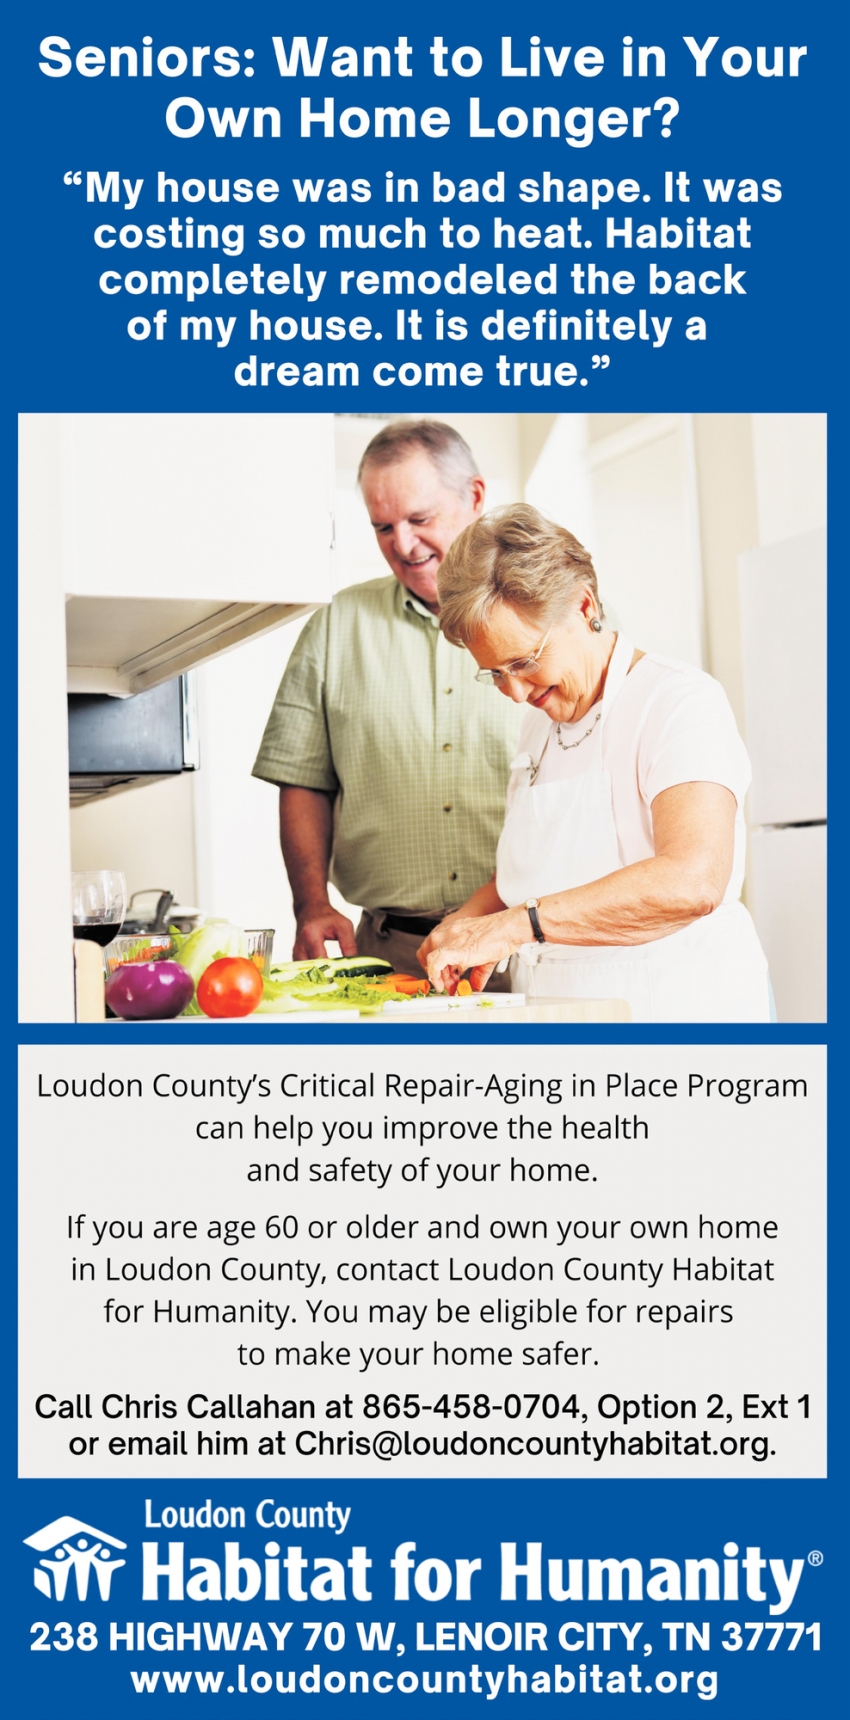 Want to Live in Your Own Home Longer?